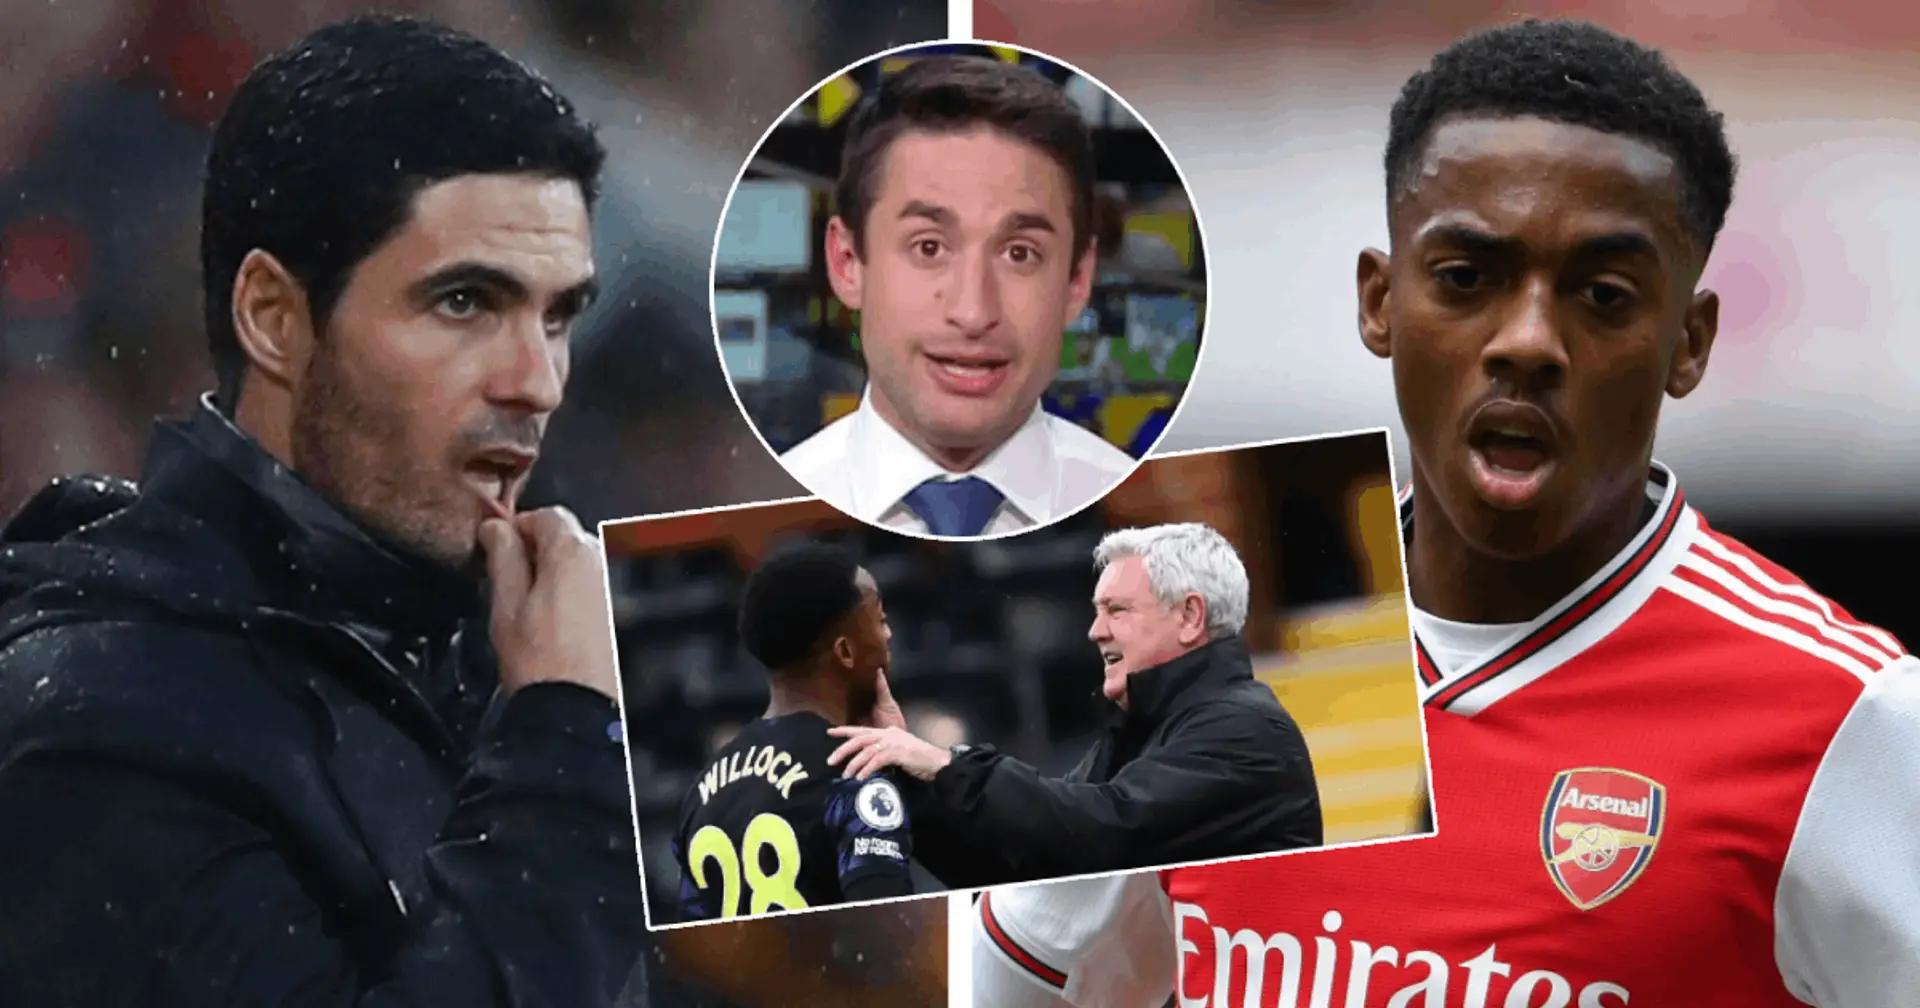 'It’s an absolutely fascinating dilemma for Arsenal': David Ornstein provides update on Joe Willock's future